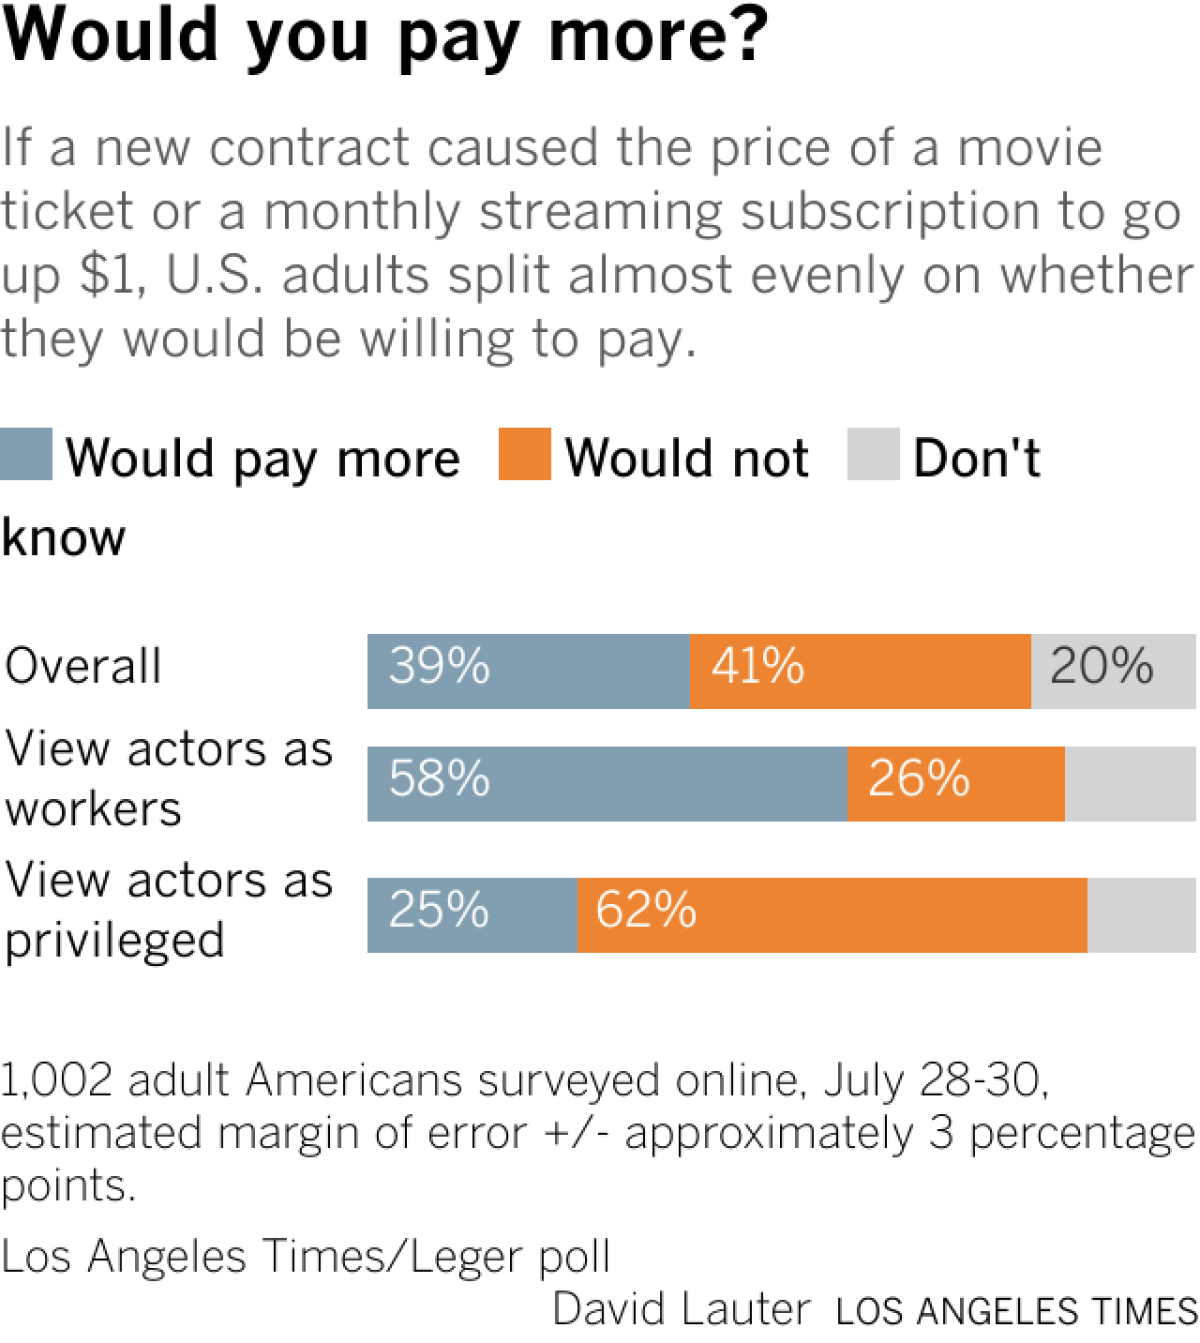 If a new contract caused the price of a movie ticket or a monthly streaming subscription to go up $1, U.S. adults split almost evenly on whether they would be willing to pay.